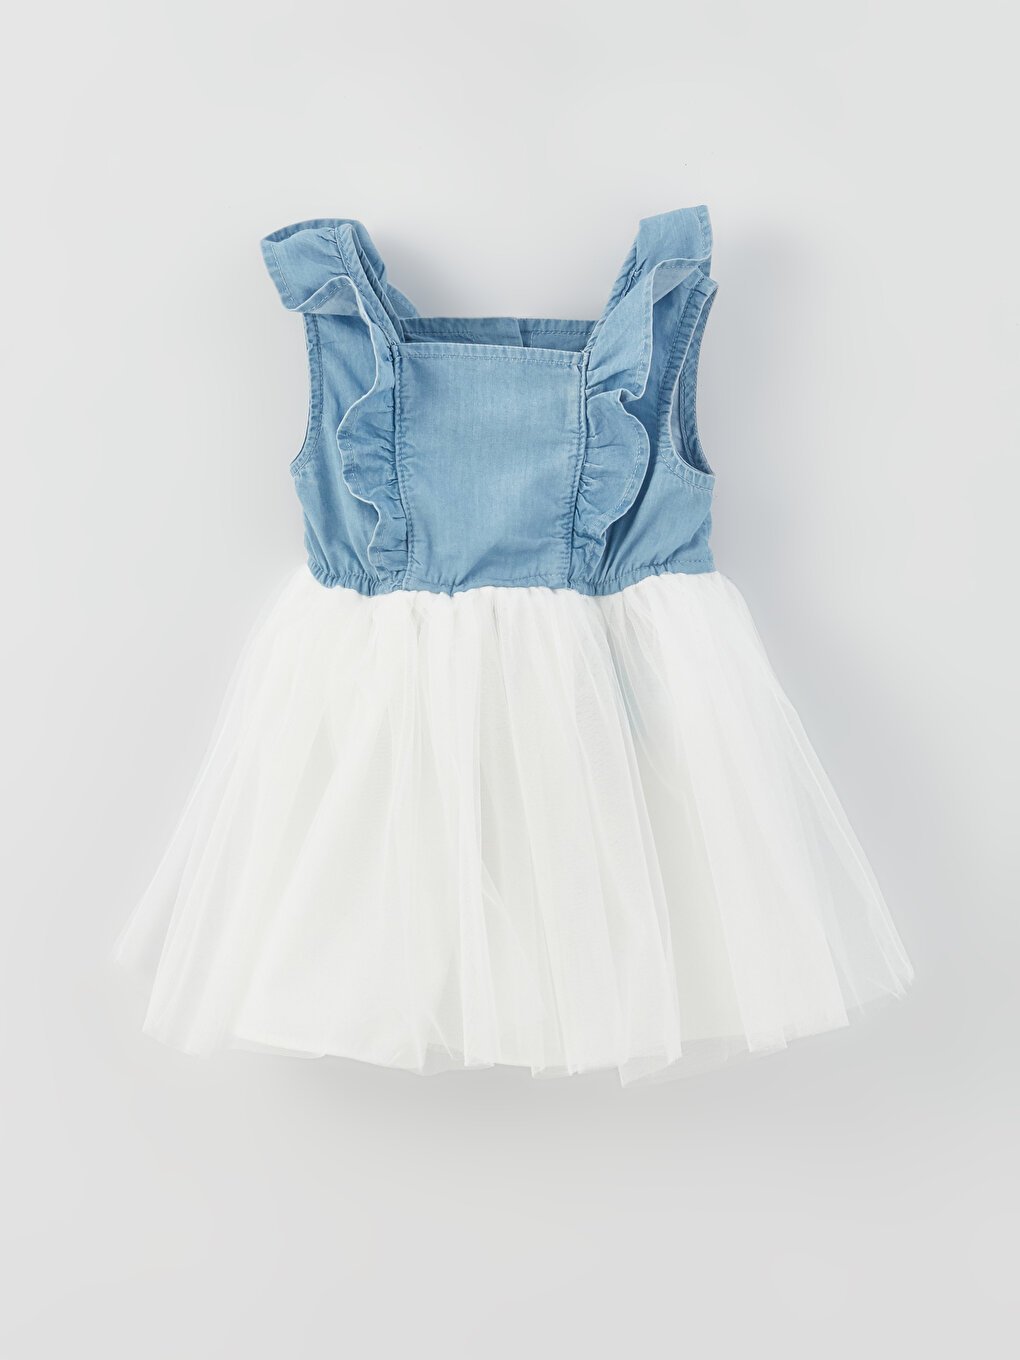 fcity.in - Baby Princess Denim Dress For Baby Dress Denim Dress Denim 7year-daiichi.edu.vn